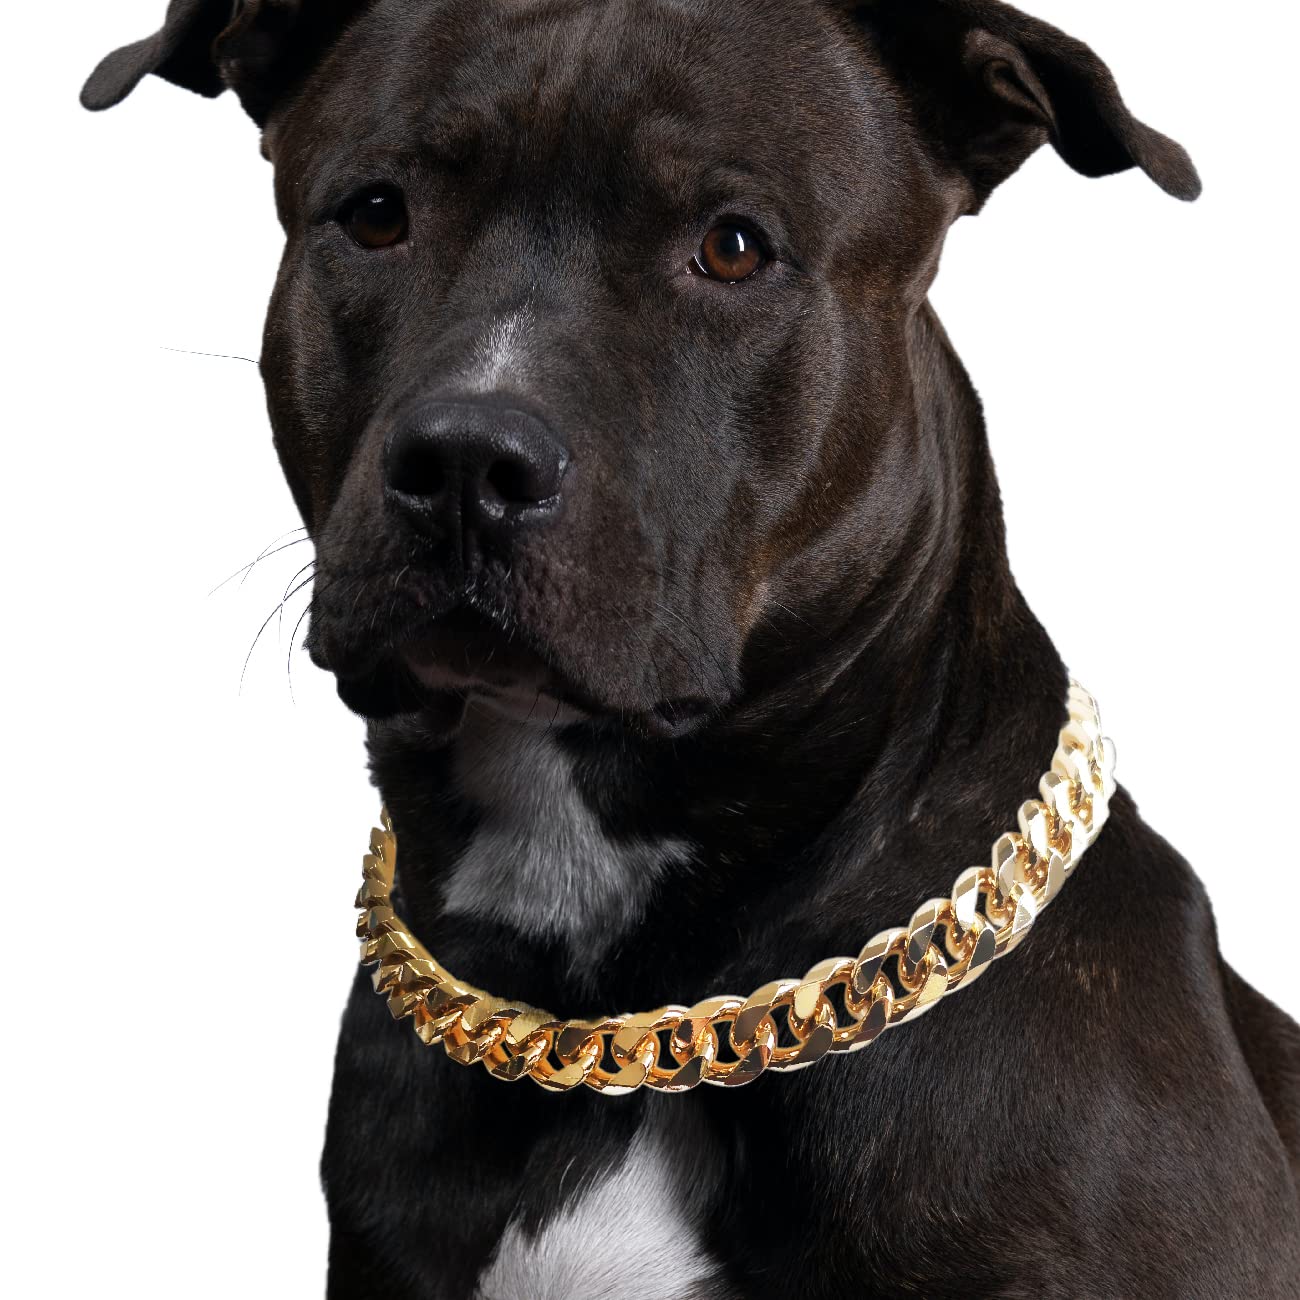 Cuban Link Dog Collar - 3/4 in Wide Metal Chain Dog Collar Venom Black, The Newest Design Stunning Pet Accessory, Cute Luxury Jewelry Costume 20 inches